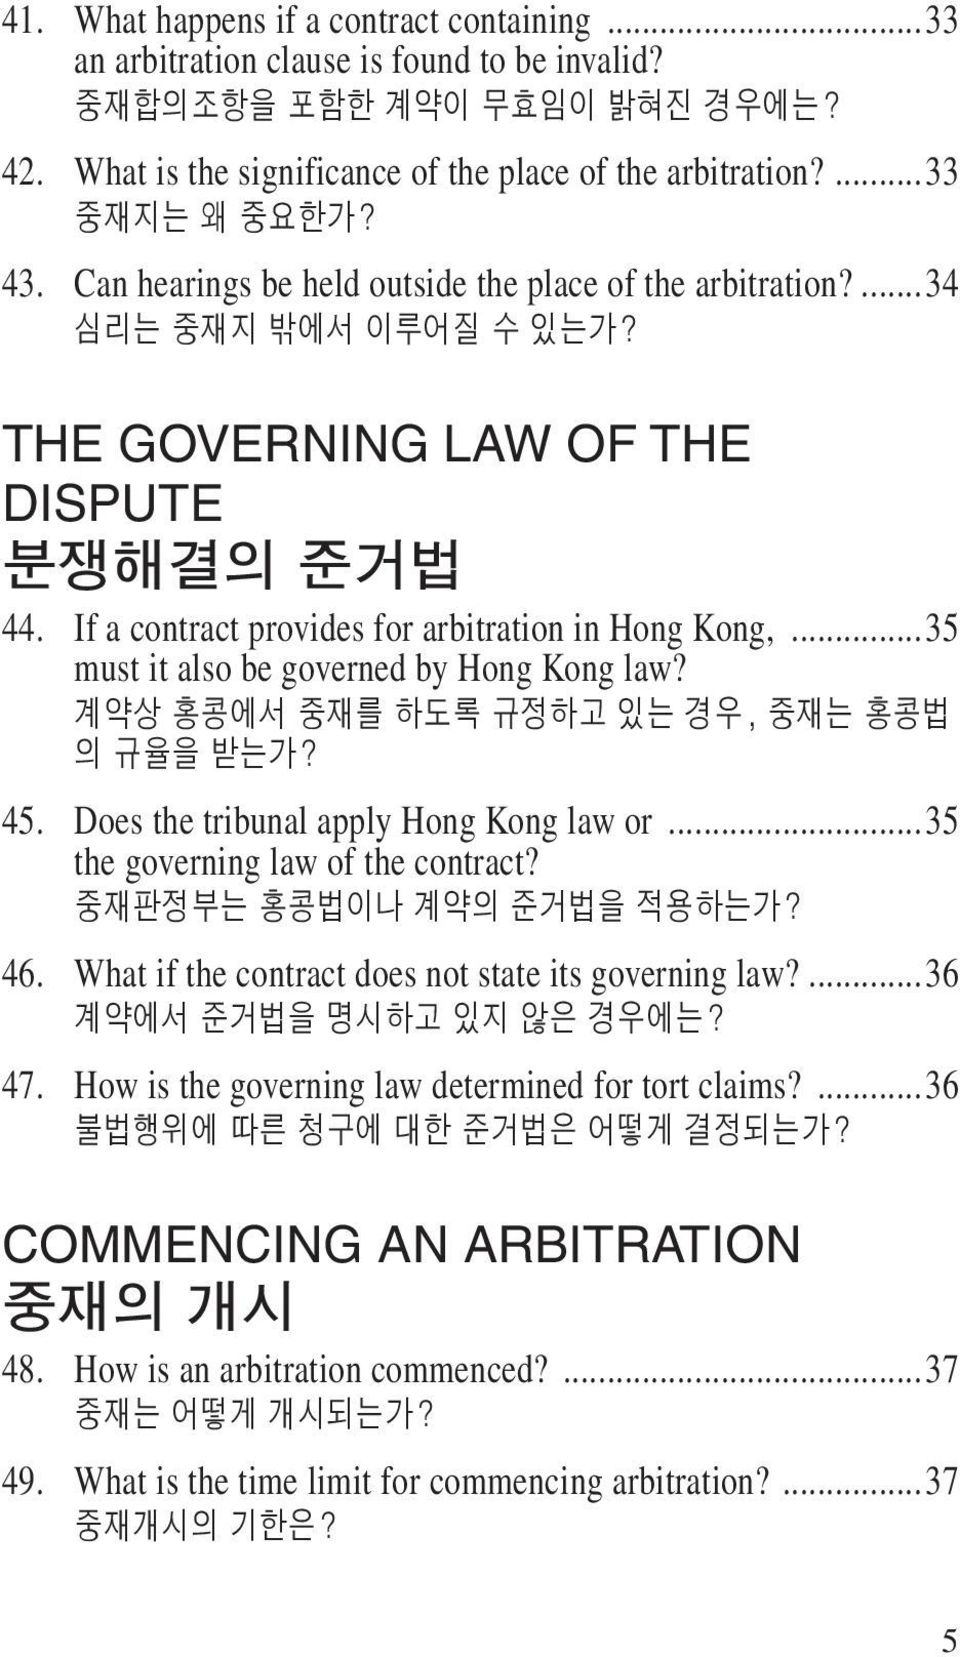 If a contract provides for arbitration in Hong Kong,...35 must it also be governed by Hong Kong law? 계약상 홍콩에서 중재를 하도록 규정하고 있는 경우, 중재는 홍콩법 의 규율을 받는가? 45. Does the tribunal apply Hong Kong law or.